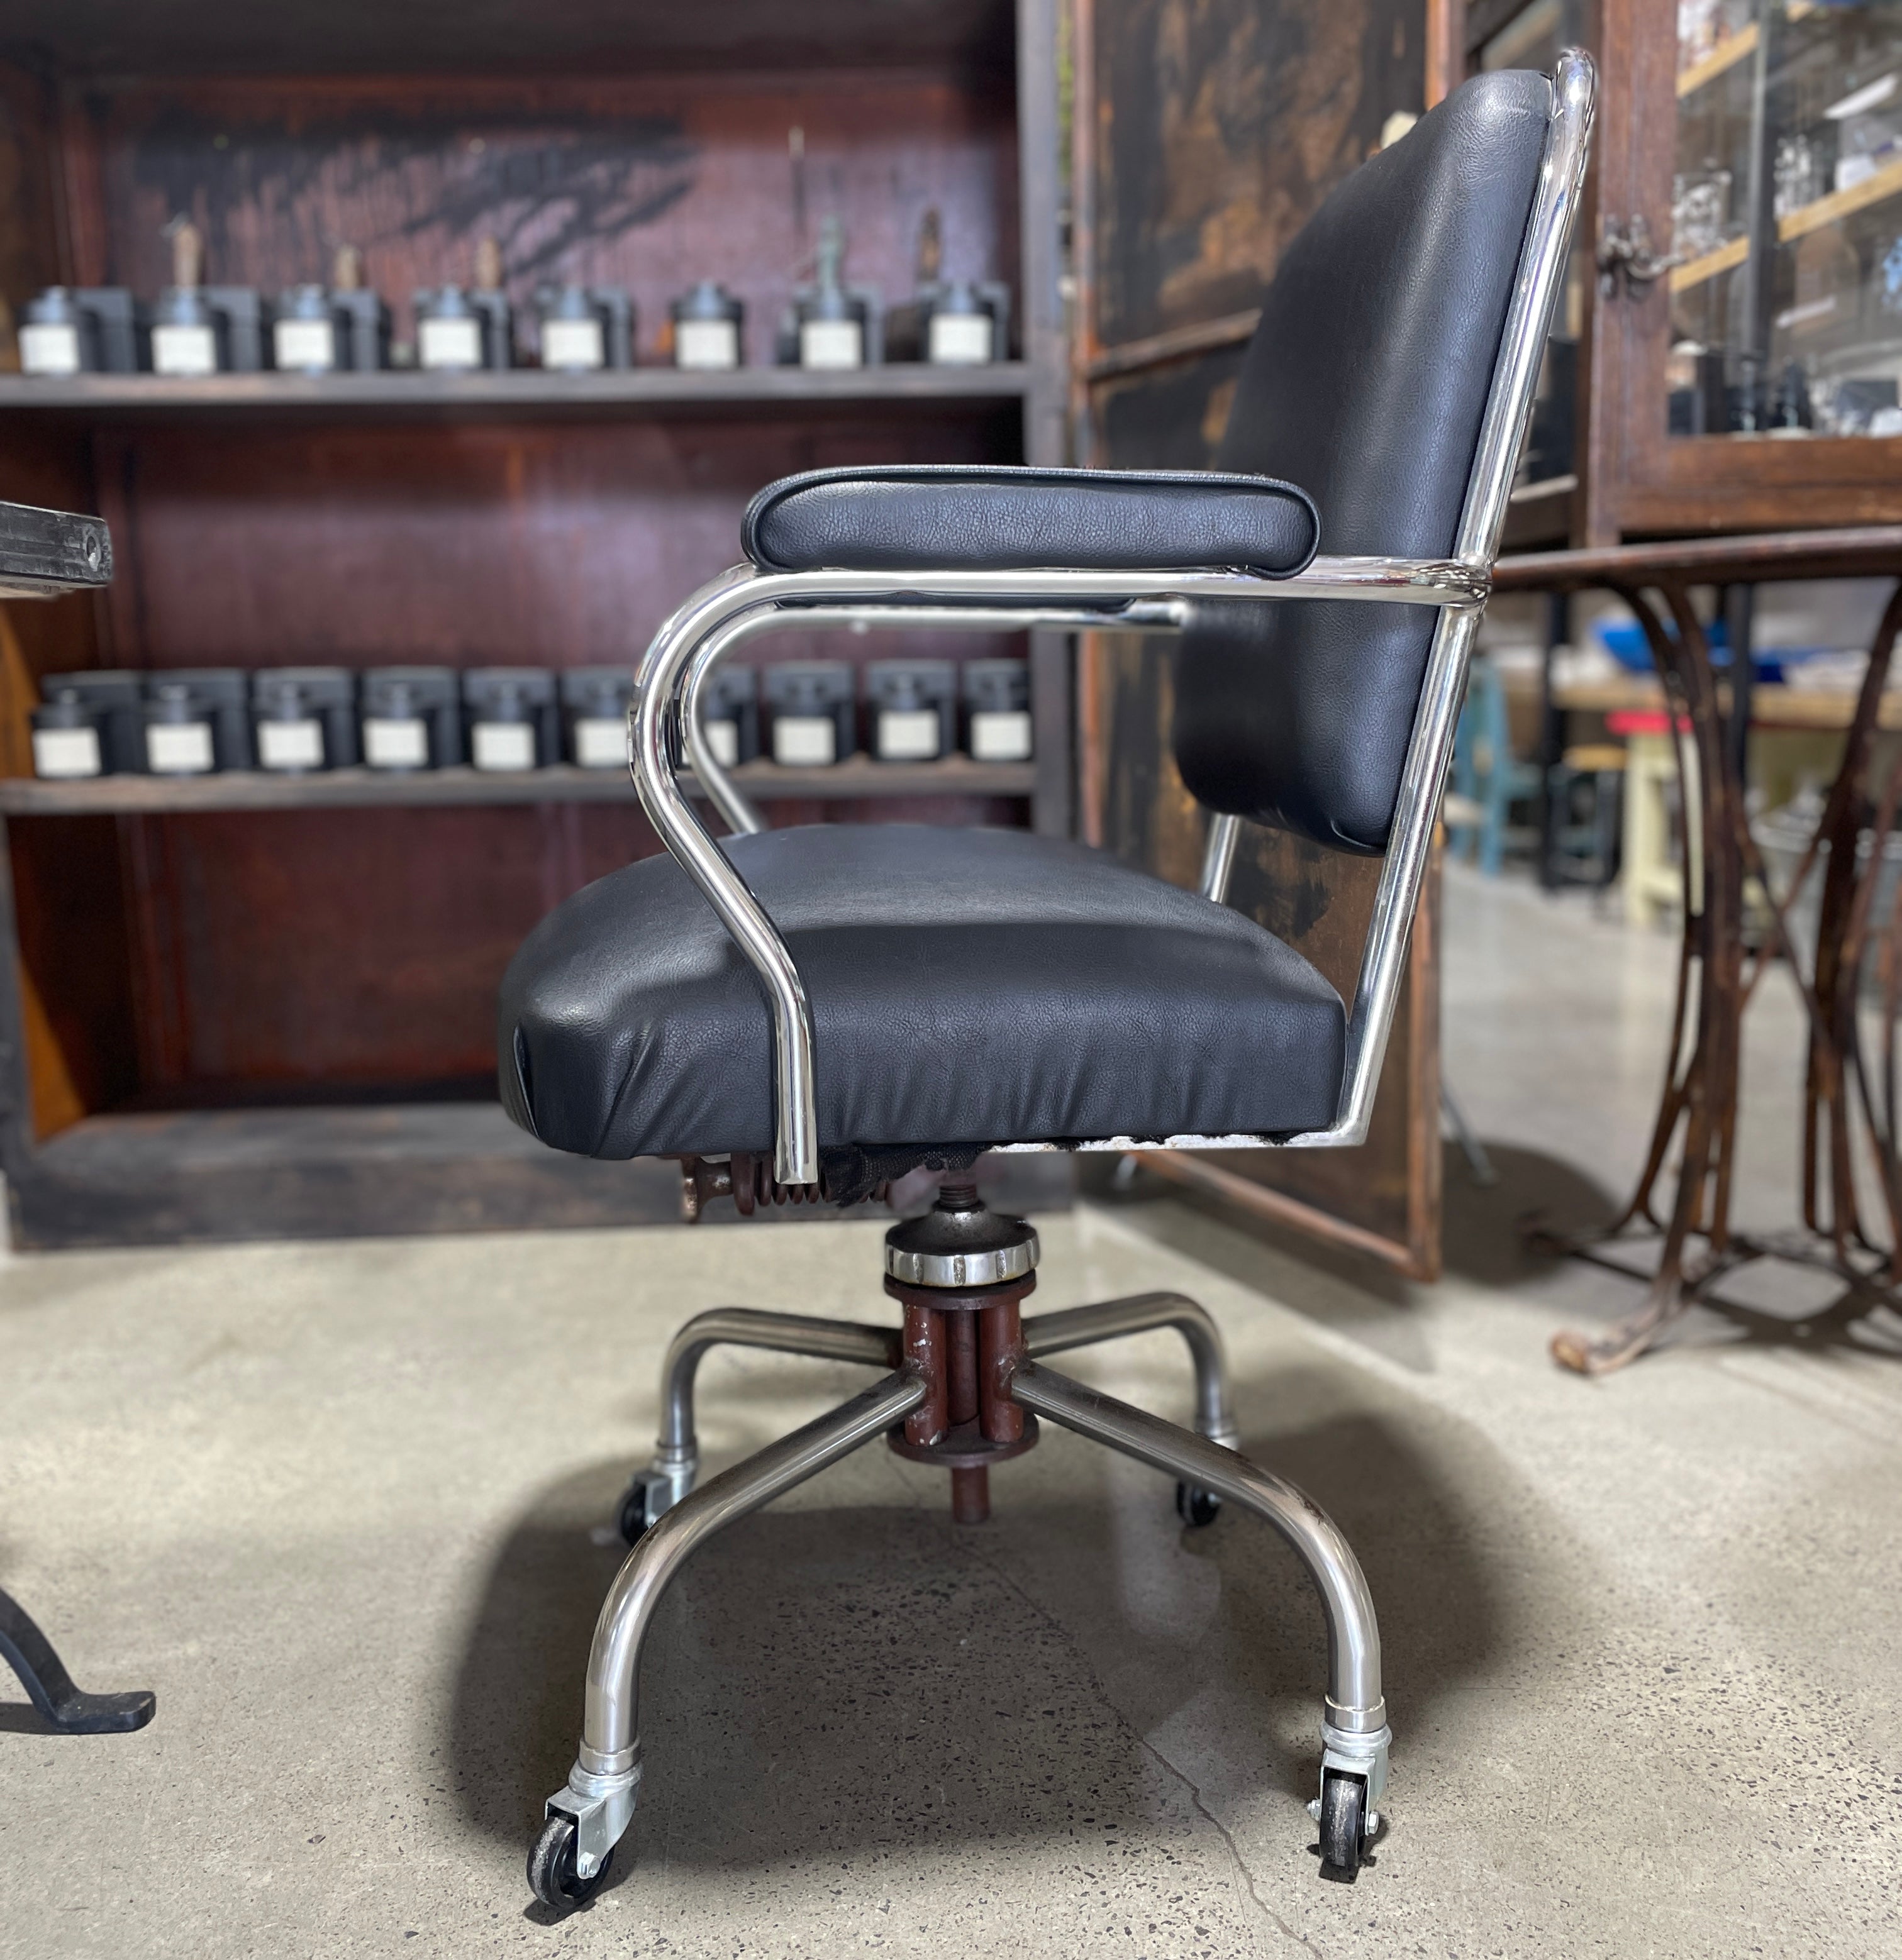 Vintage 1930s Office Swivel Chair - Chrome and Black